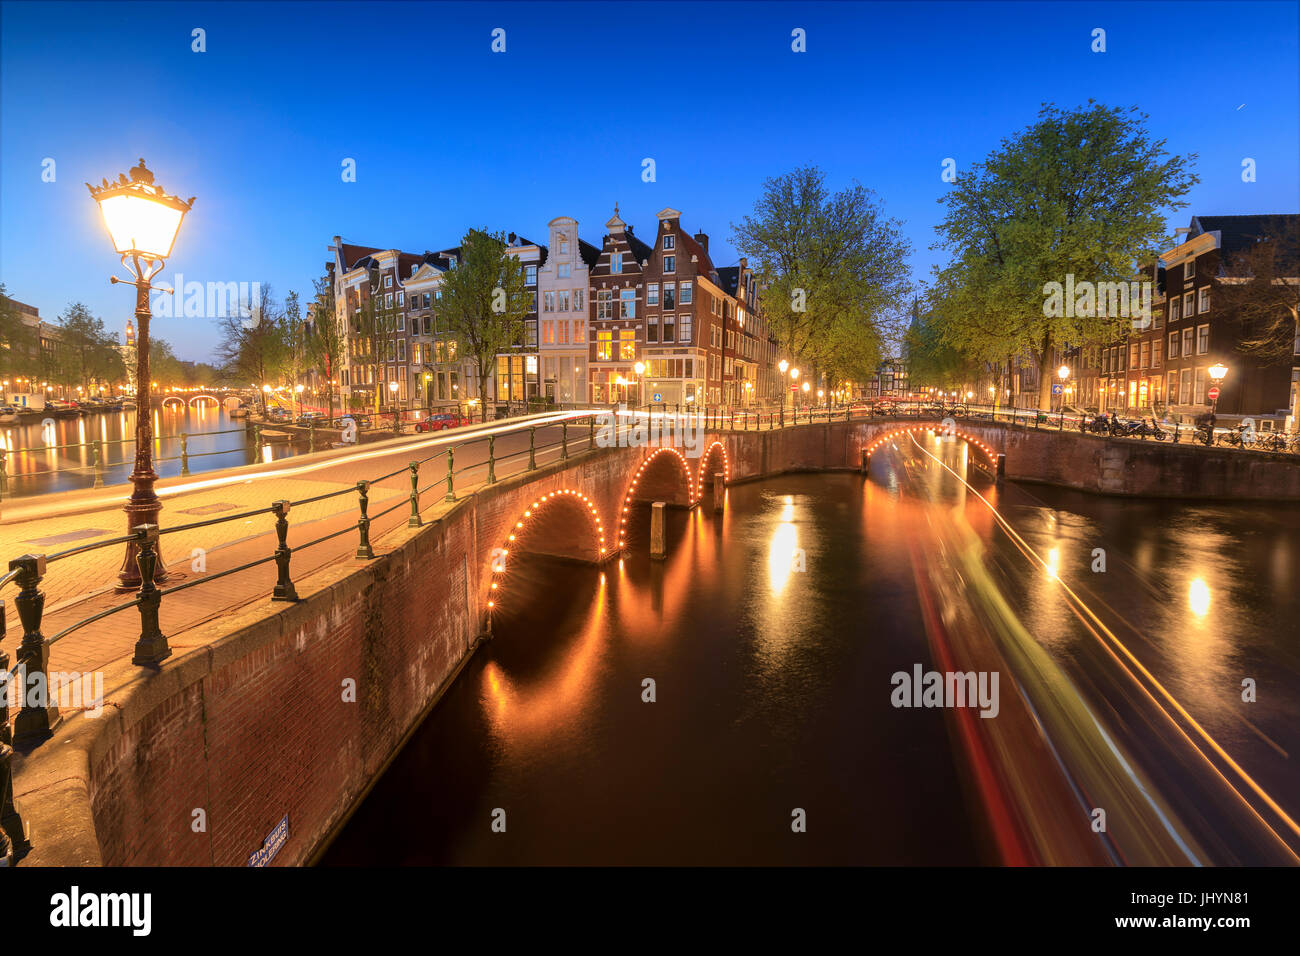 Dusk lights on typical buildings and bridges reflected in a typical canal, Amsterdam, Holland (The Netherlands), Europe Stock Photo